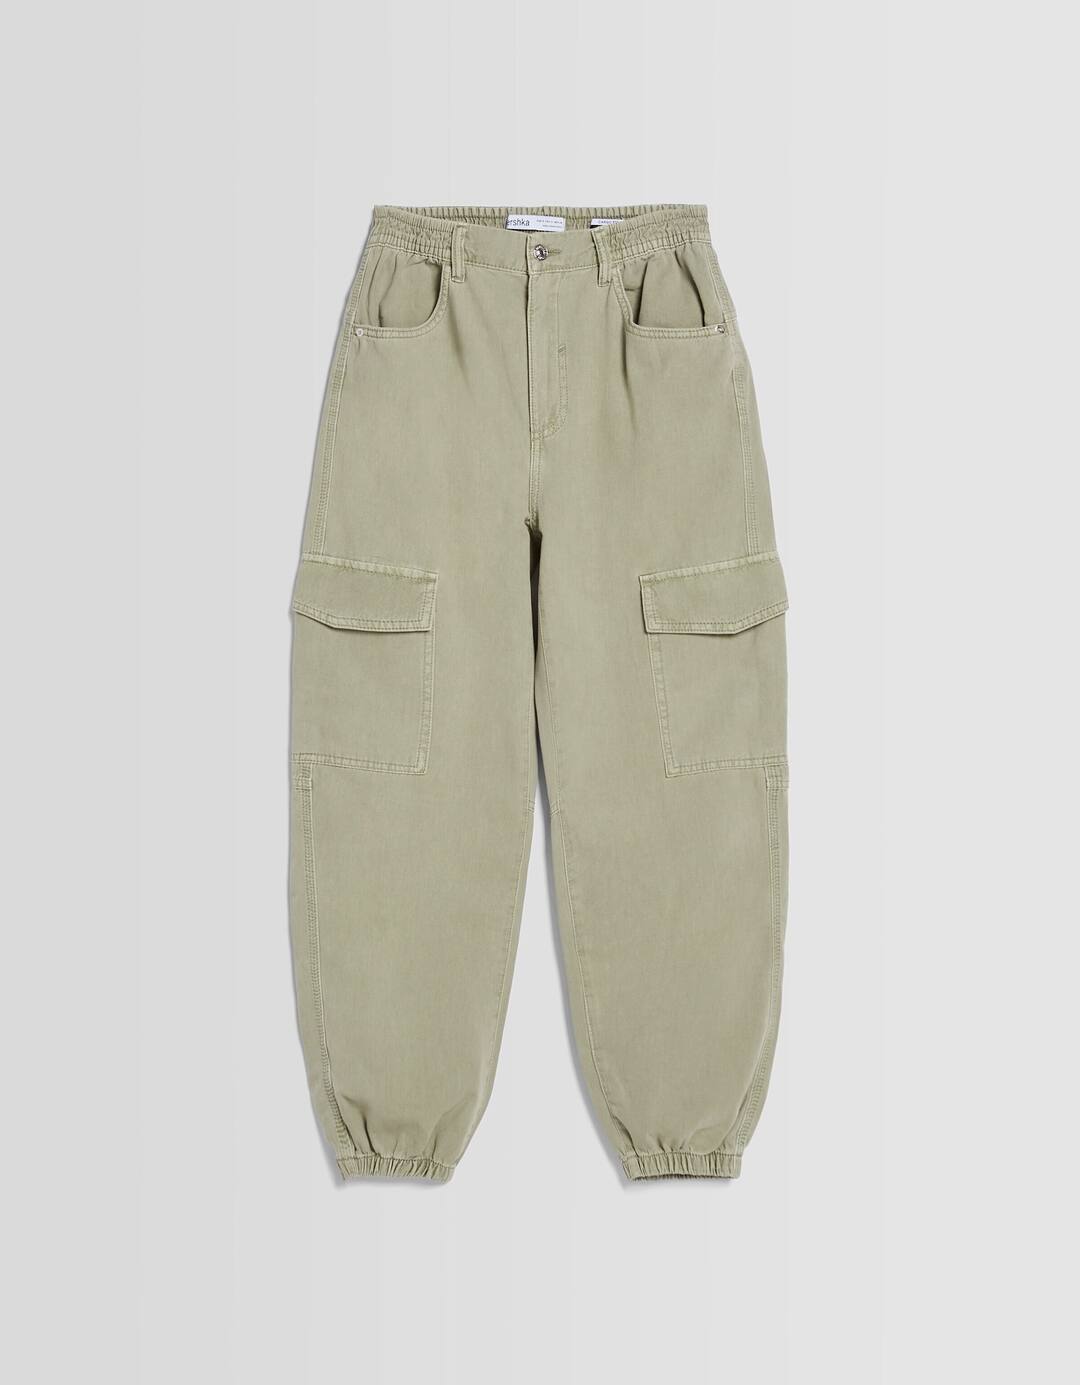 Cotton joggers with a gathered waist and pockets